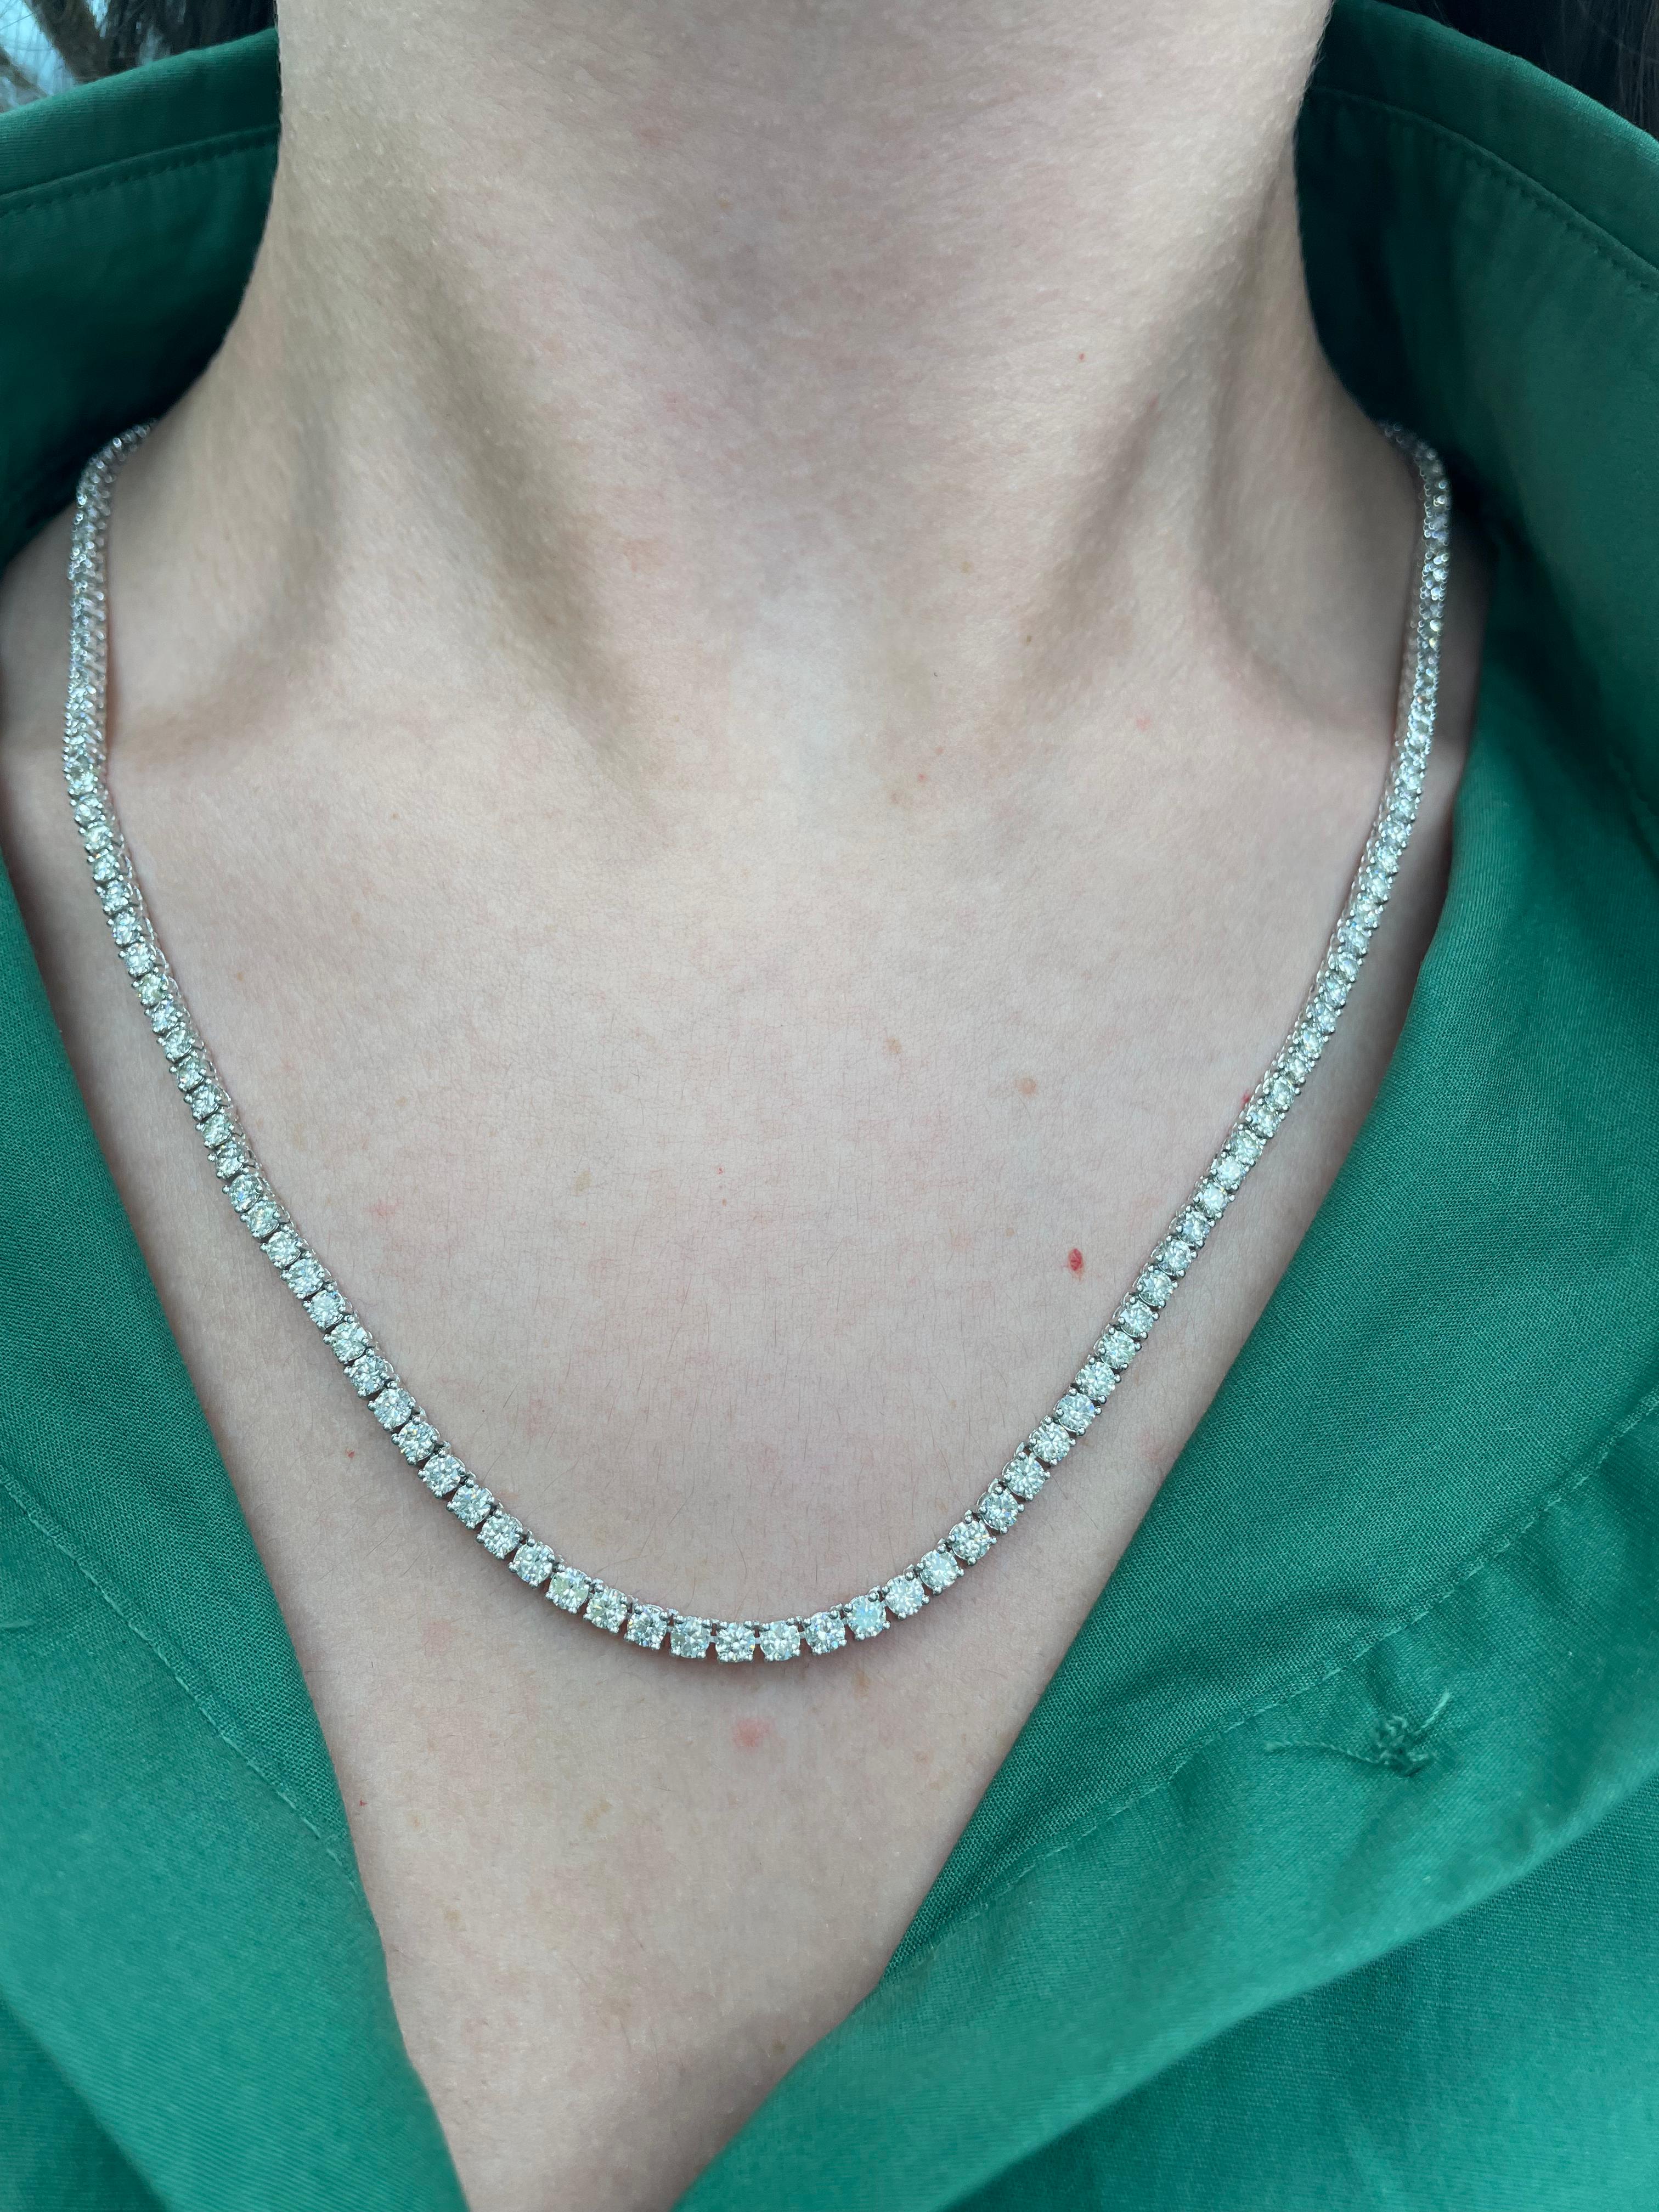 Beautiful and classic long diamond tennis necklace, by Alexander Beverly Hills.
16.68 carats of round brilliant diamonds, approximately G/H color and VS clarity. 14k white gold, 25.24 grams, prong set, 22in.
Accommodated with an up-to-date appraisal